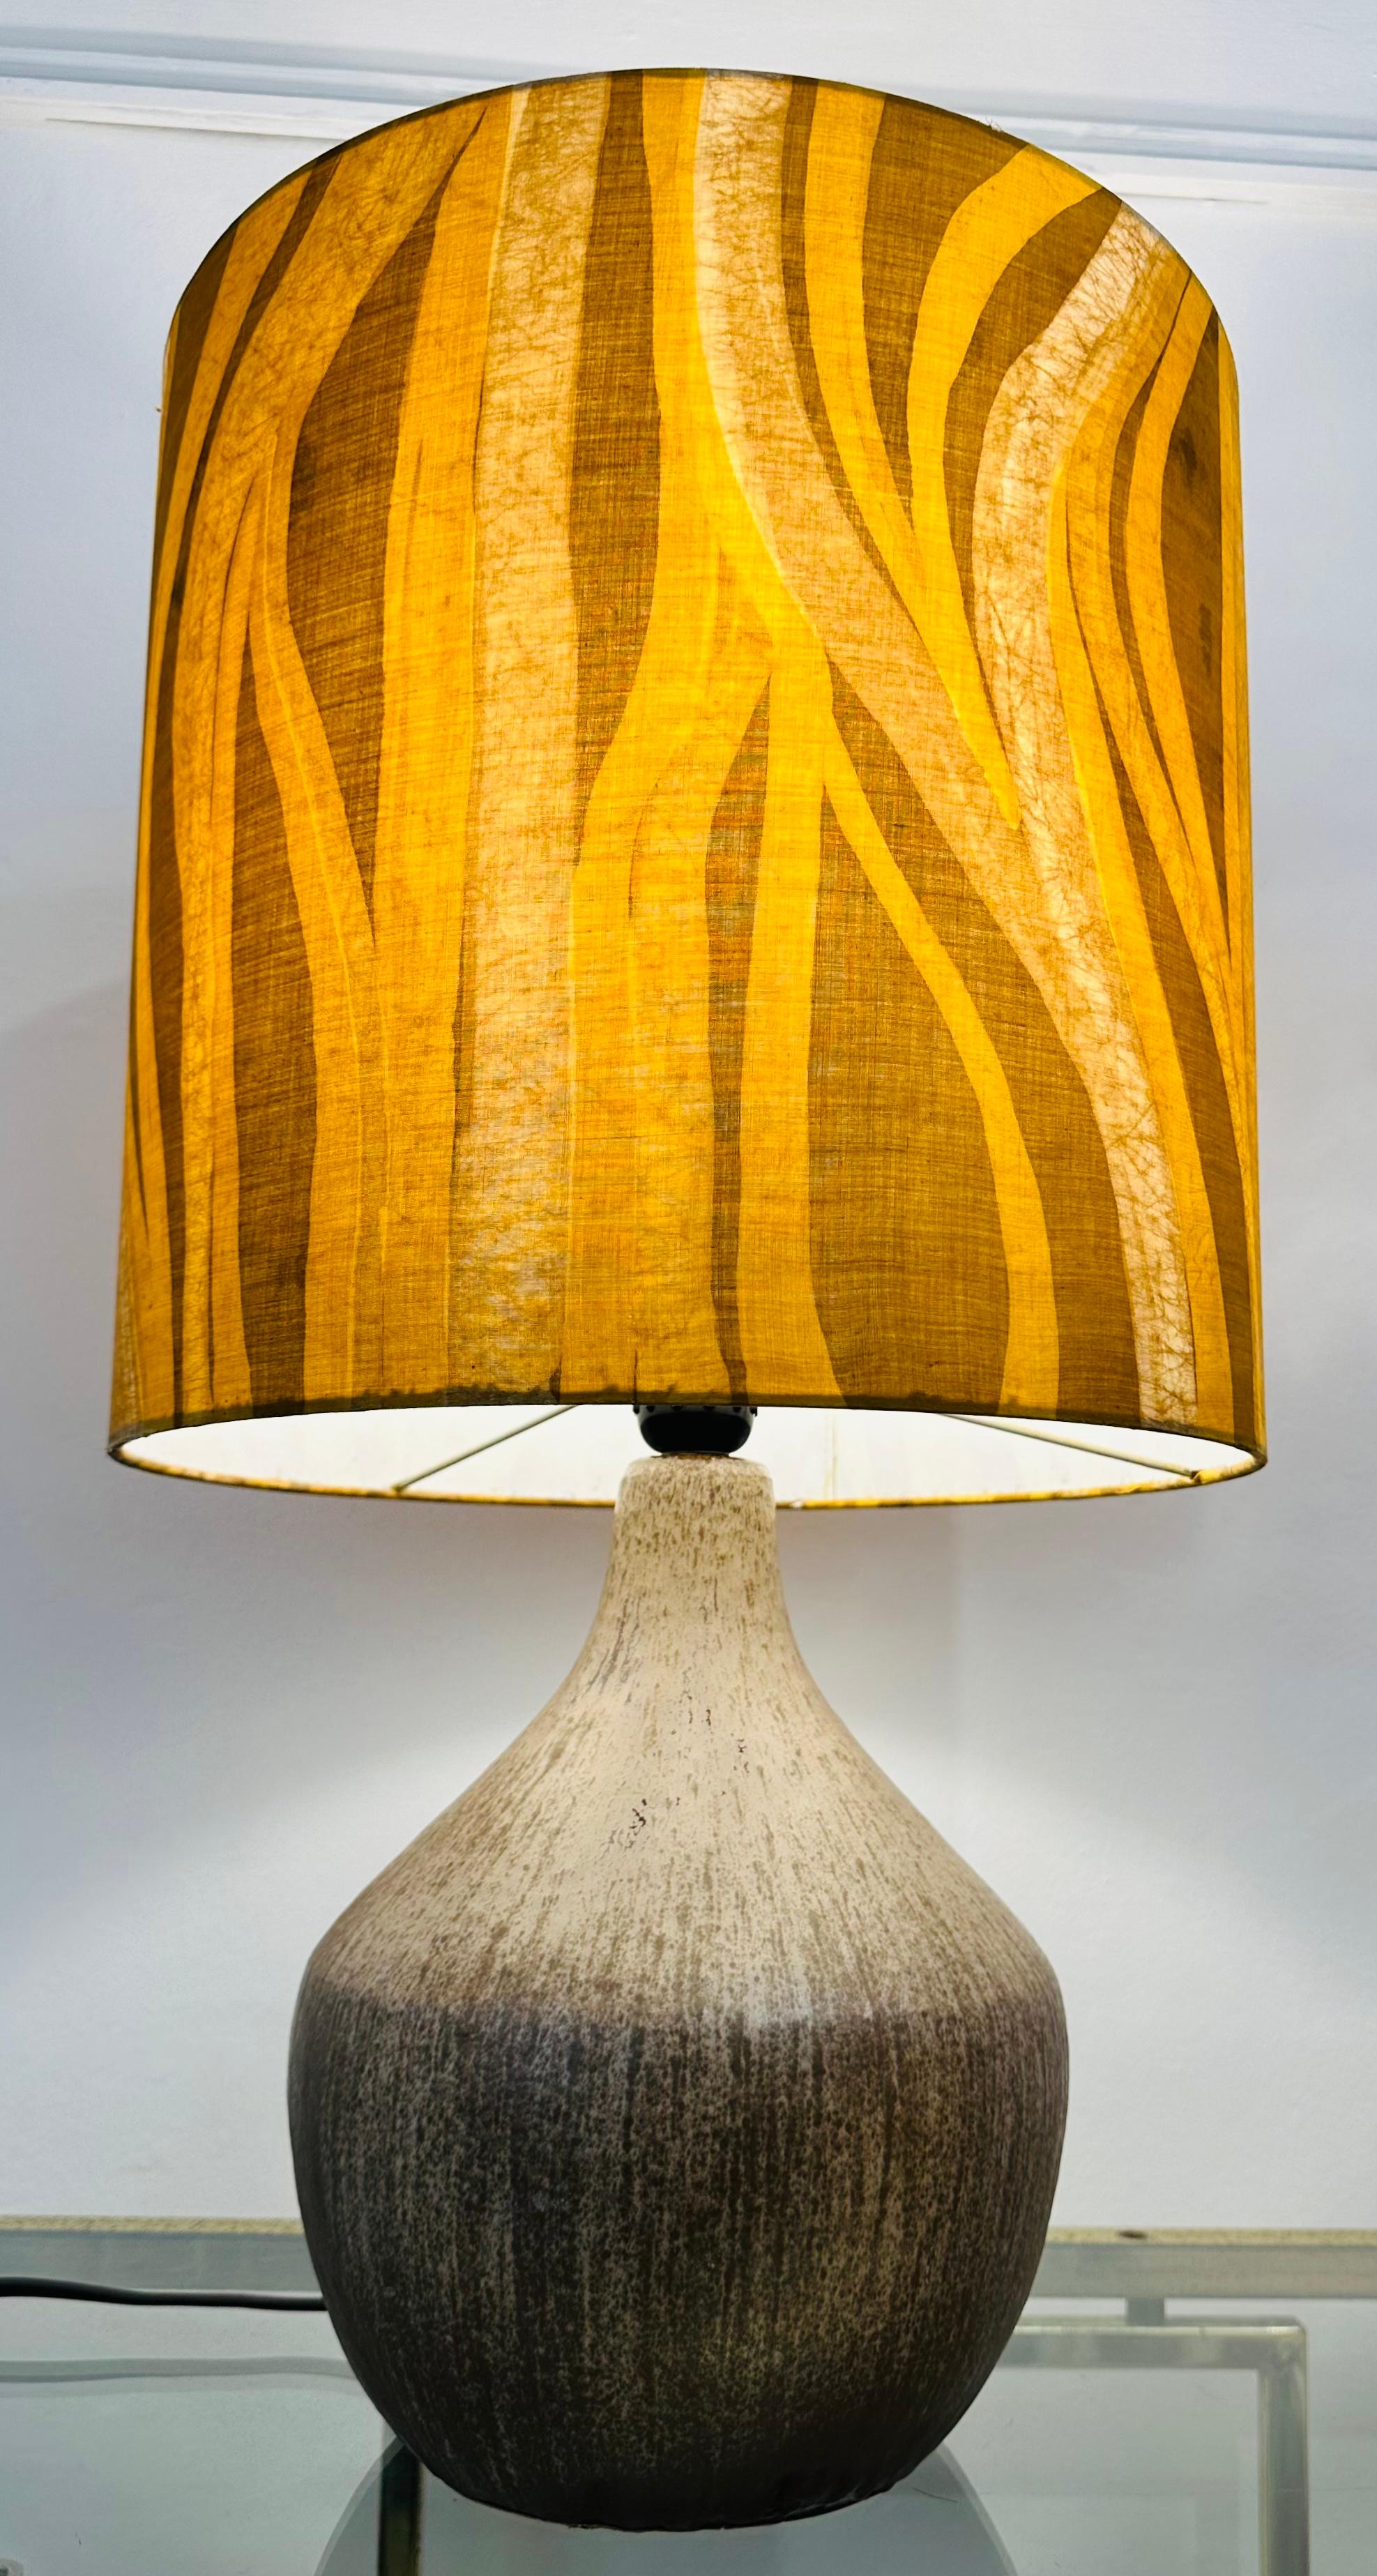 1970s French Earthenware Ceramic Glazed Table Lamp inc Original Geometric Shade For Sale 2